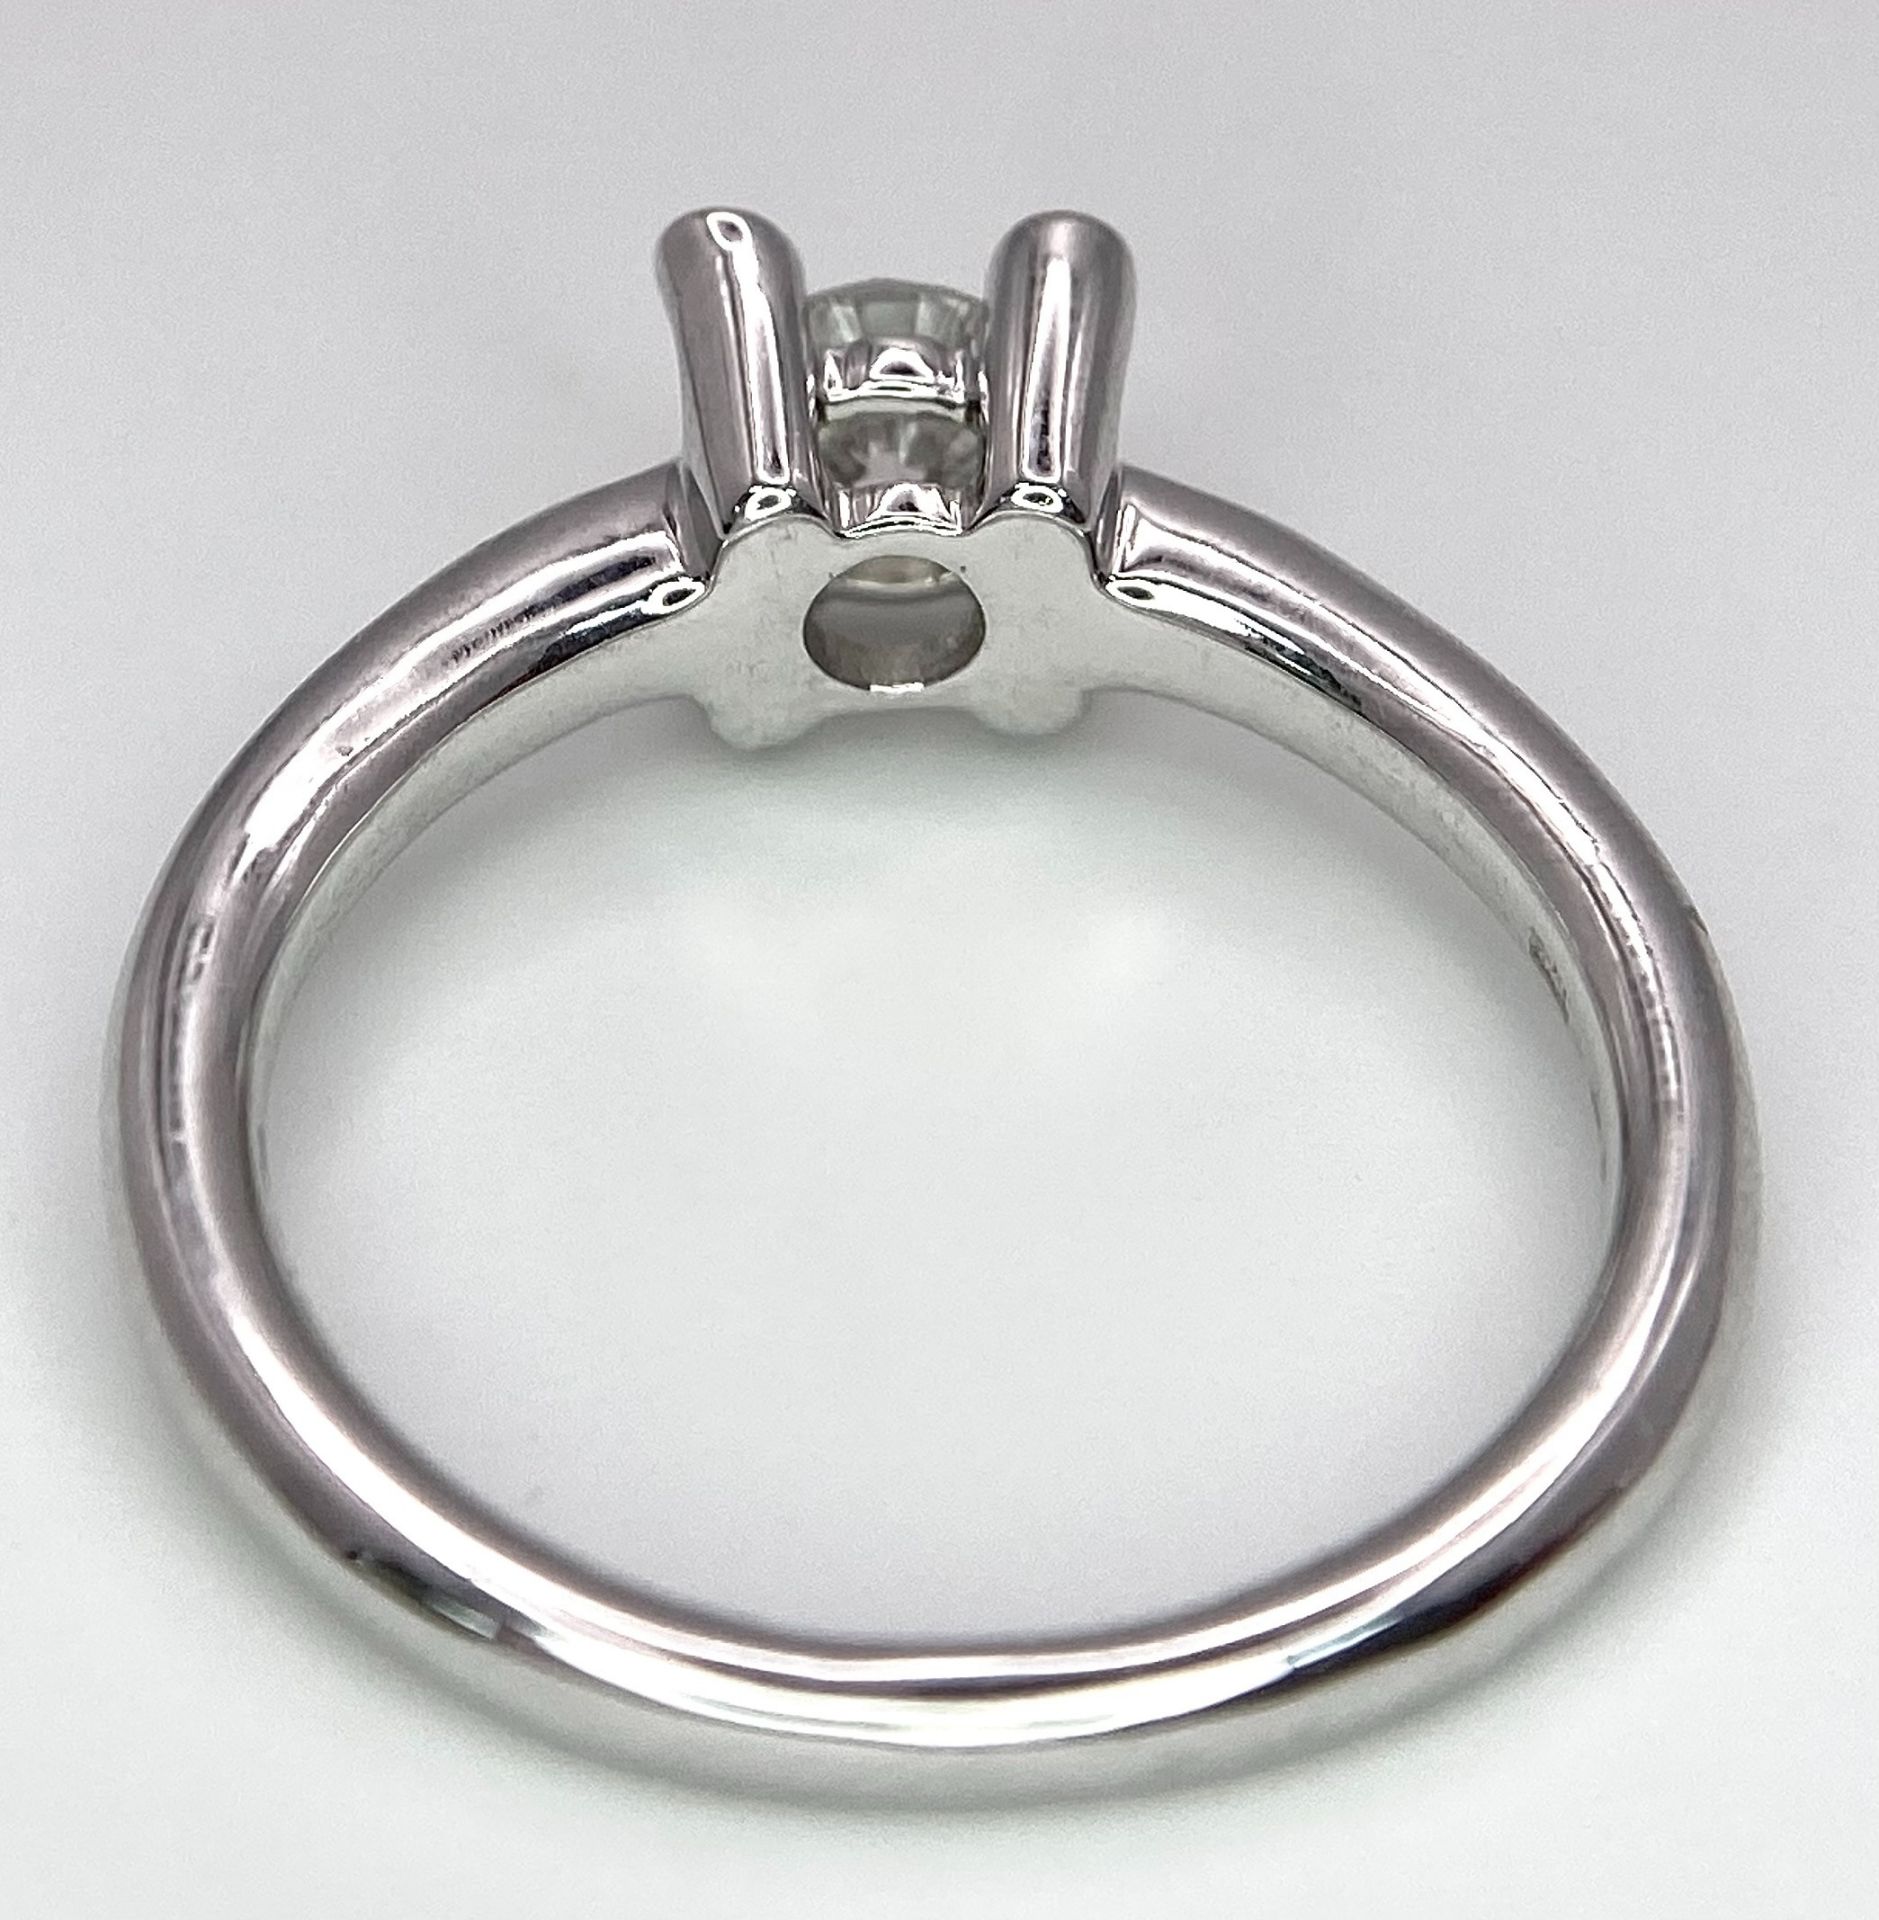 AN 18K WHITE GOLD DIAMOND SOLITAIRE RING WITH FOUR DIAMOND TURRETS - 0.50CT 4.6G. SIZE M 1/2. - Image 5 of 10